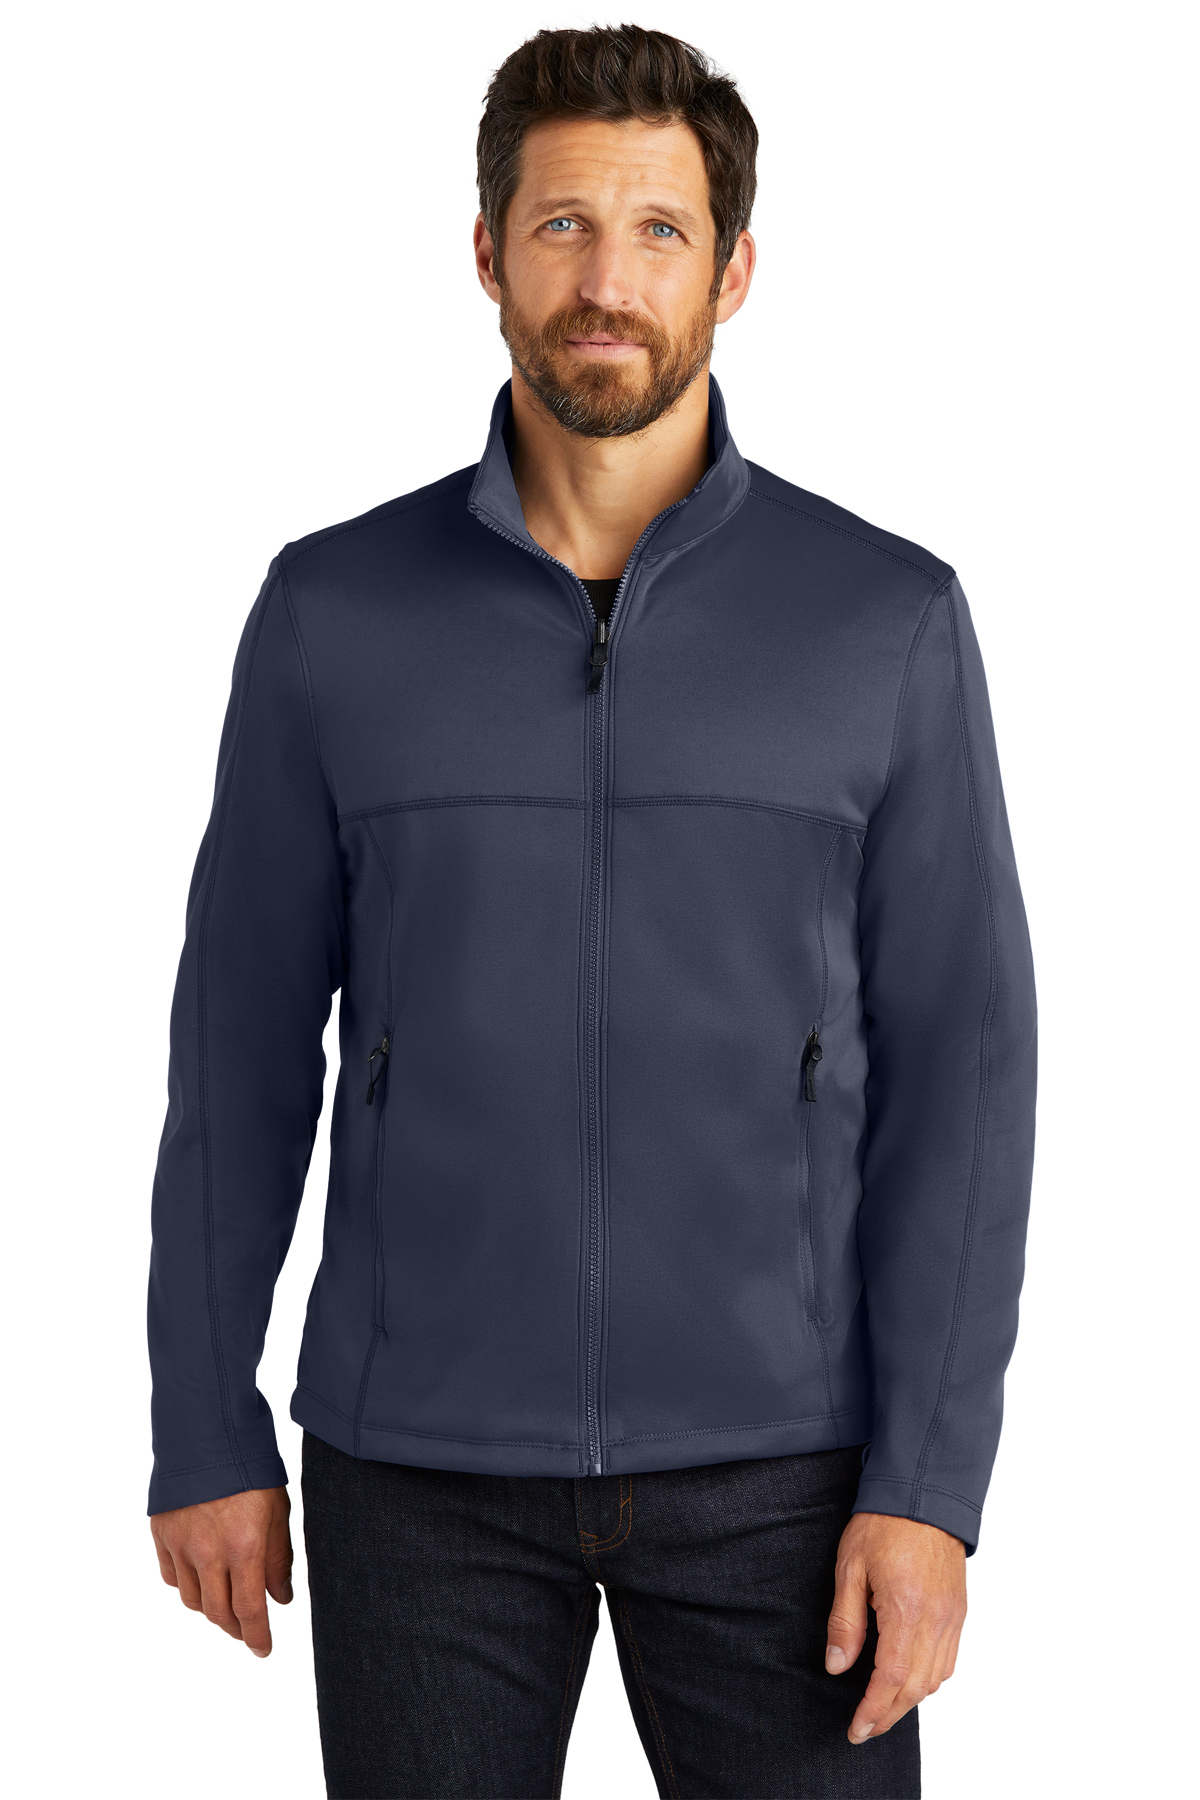 Port Authority Collective Smooth Fleece Jacket | Product | Port Authority